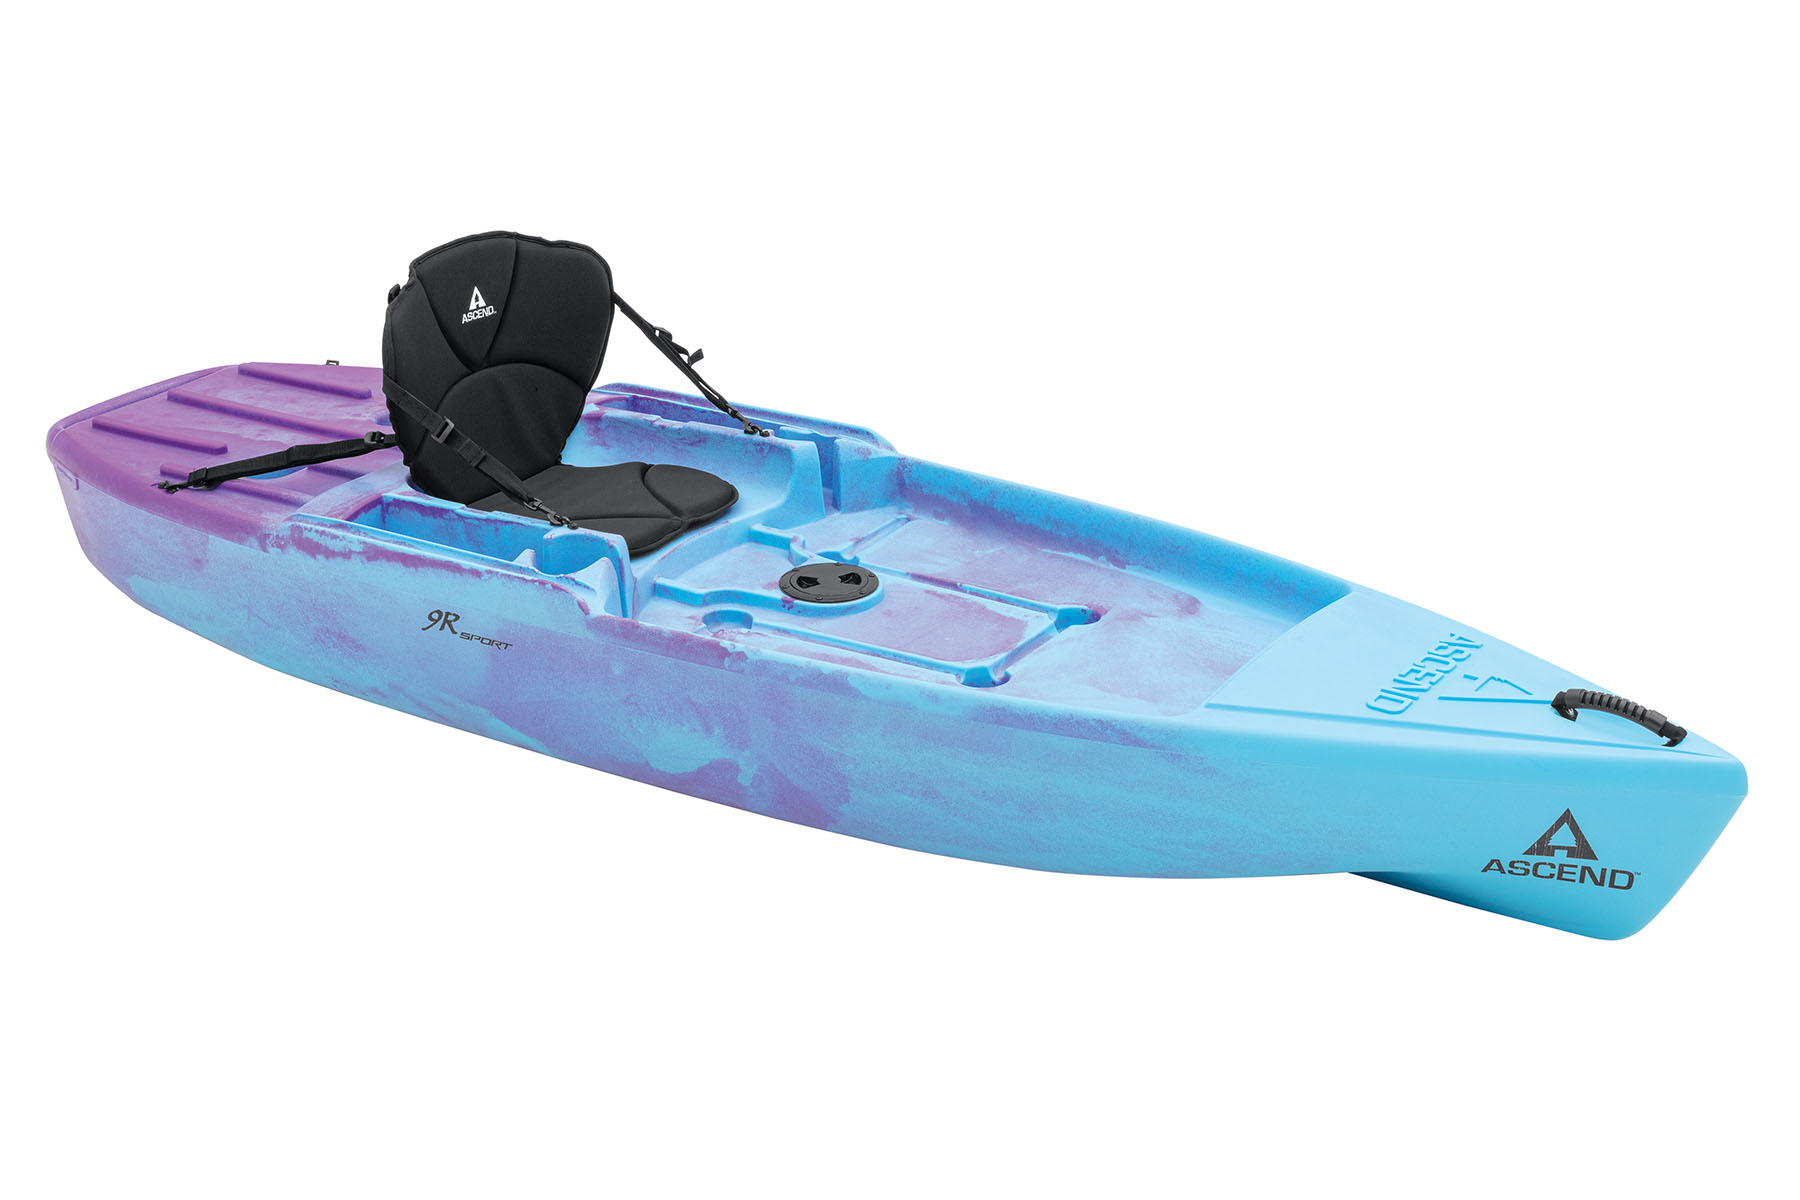 Kayak-Ascend FS12T Sit On Top Fishing for Sale in Long Beach, CA